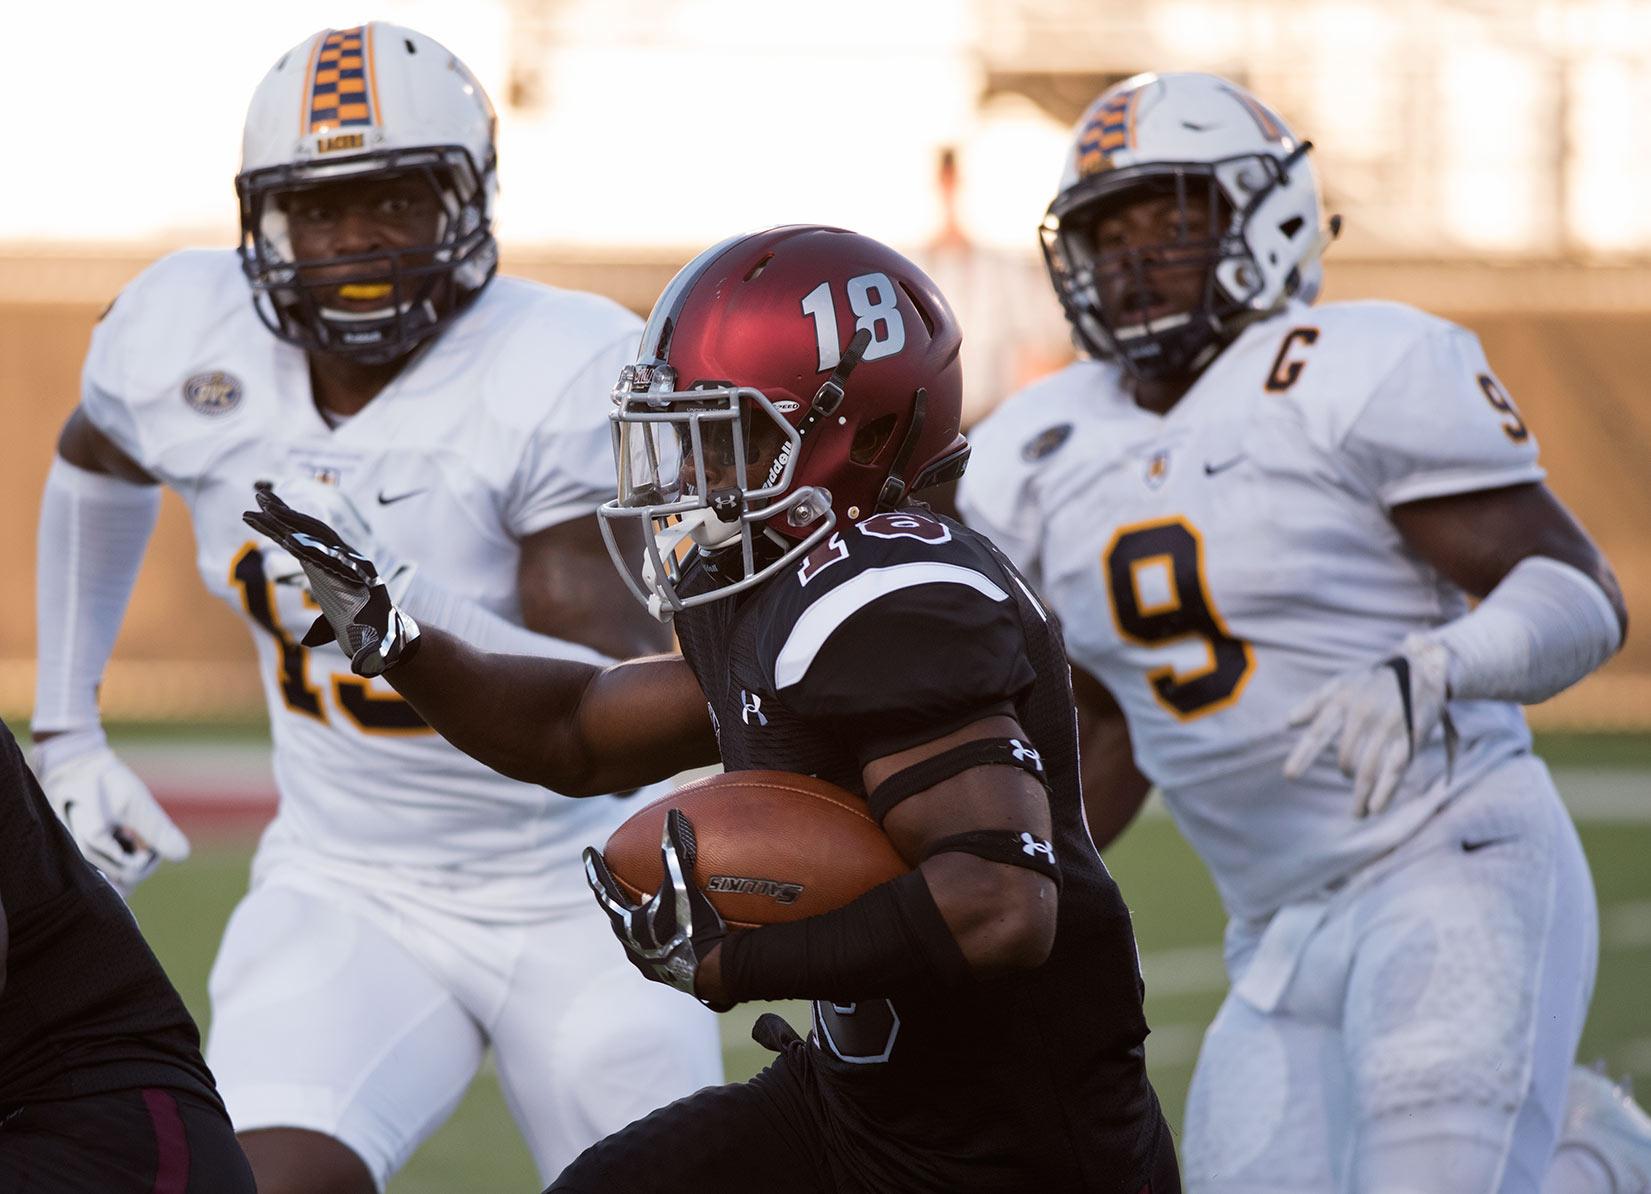 Freshman running back D.J. Davis runs with the ball during the first half of the Salukis’ matchup against Murray State on Saturday, Sept. 17, 2016, at Saluki Stadium. (Jacob Wiegand | @JacobWiegand_DE)